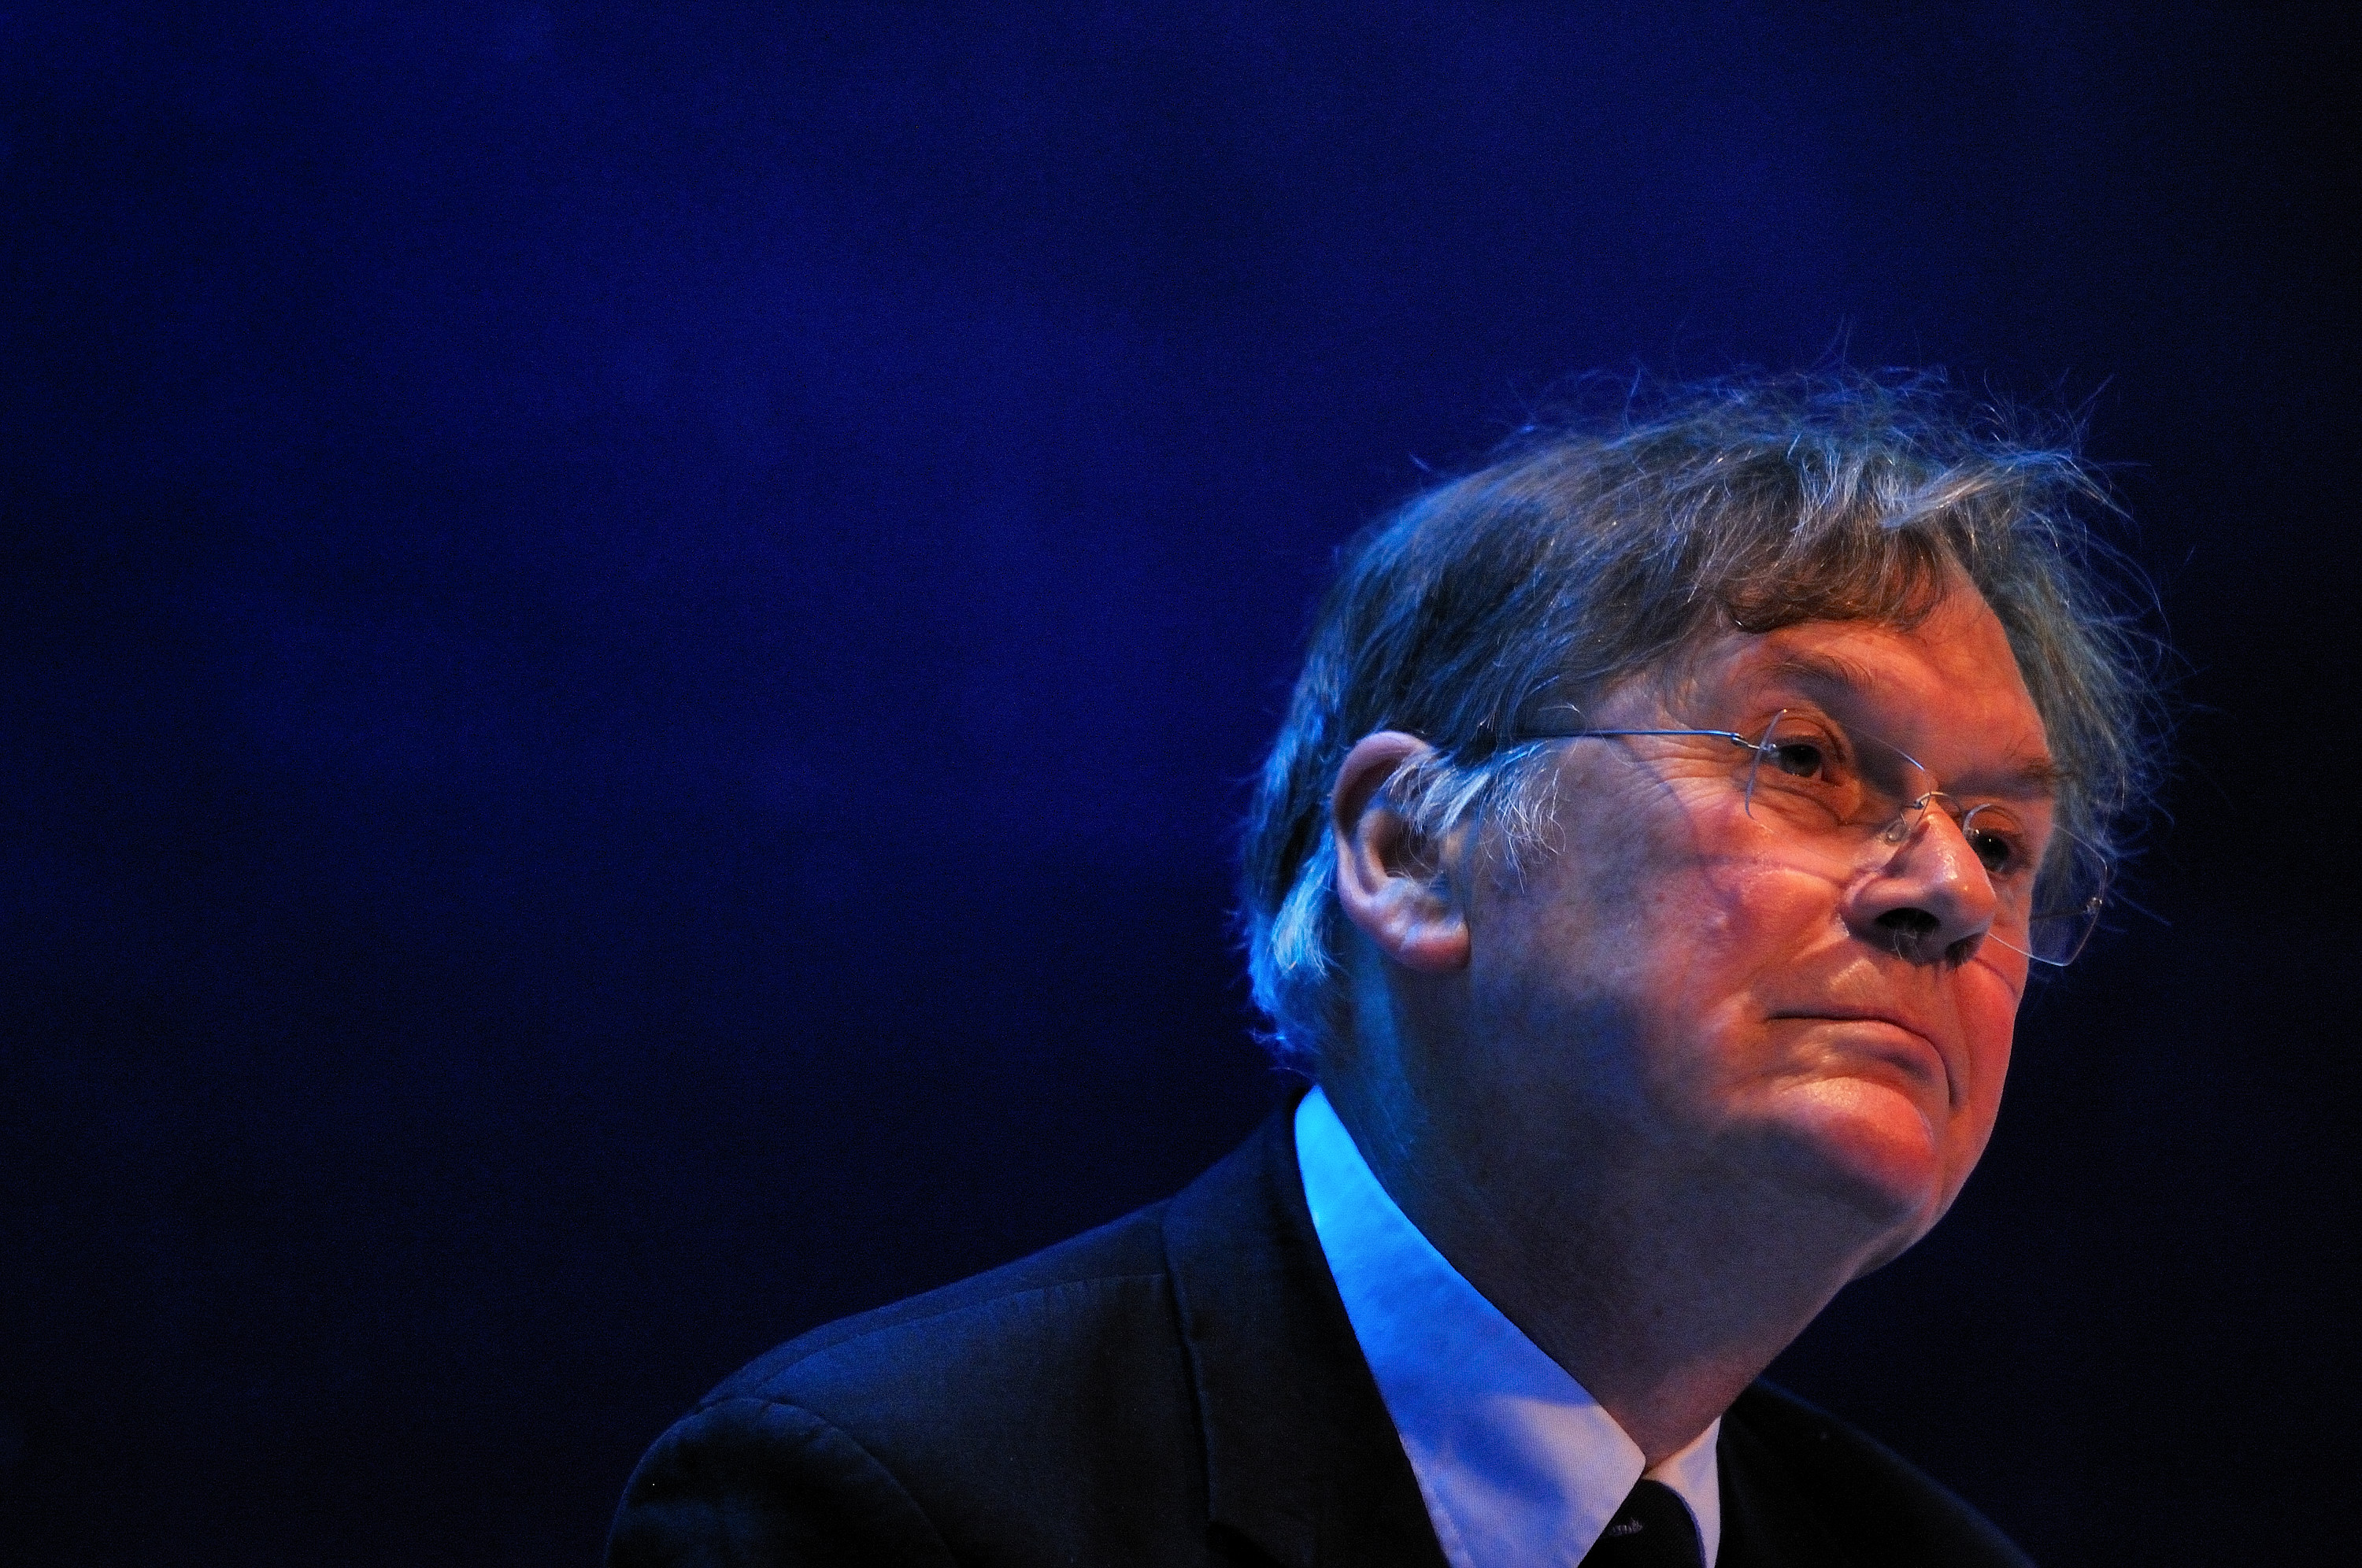 English biochemist Tim Hunt speaks during a session at the World Economic Forum Annual Meeting of the New Champions at Dalian international conference center on September 12, 2013 in Dalian, China. (ChinaFotoPress—Getty Images)